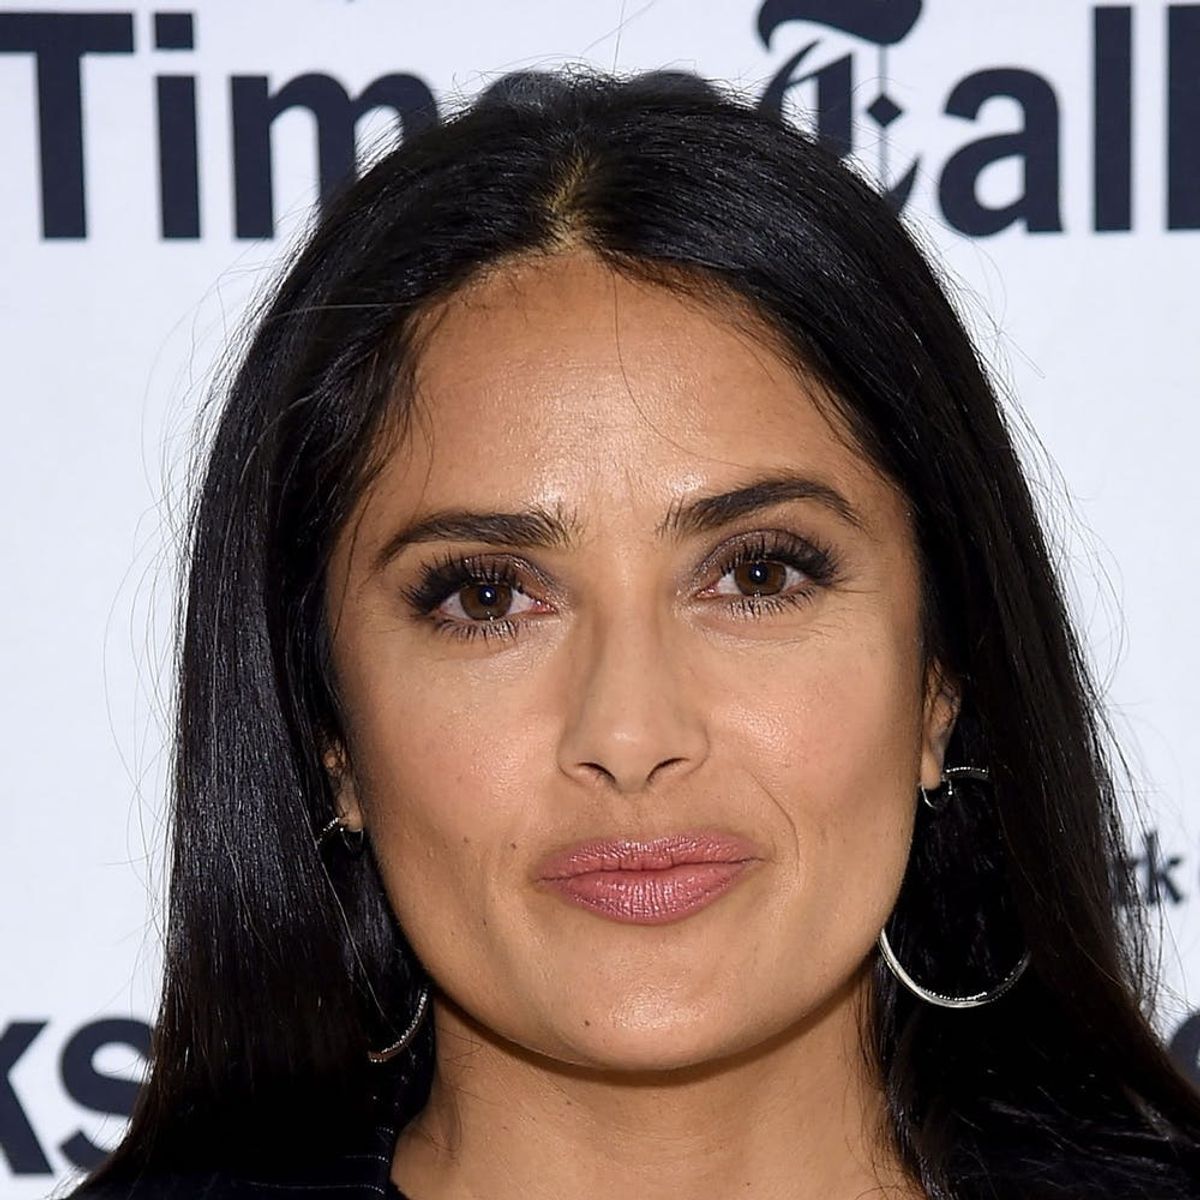 Salma Hayek Just Proved She’s the Best House Guest Ever by Taking Over Kitchen Duties for Blake Lively and Ryan Reynolds